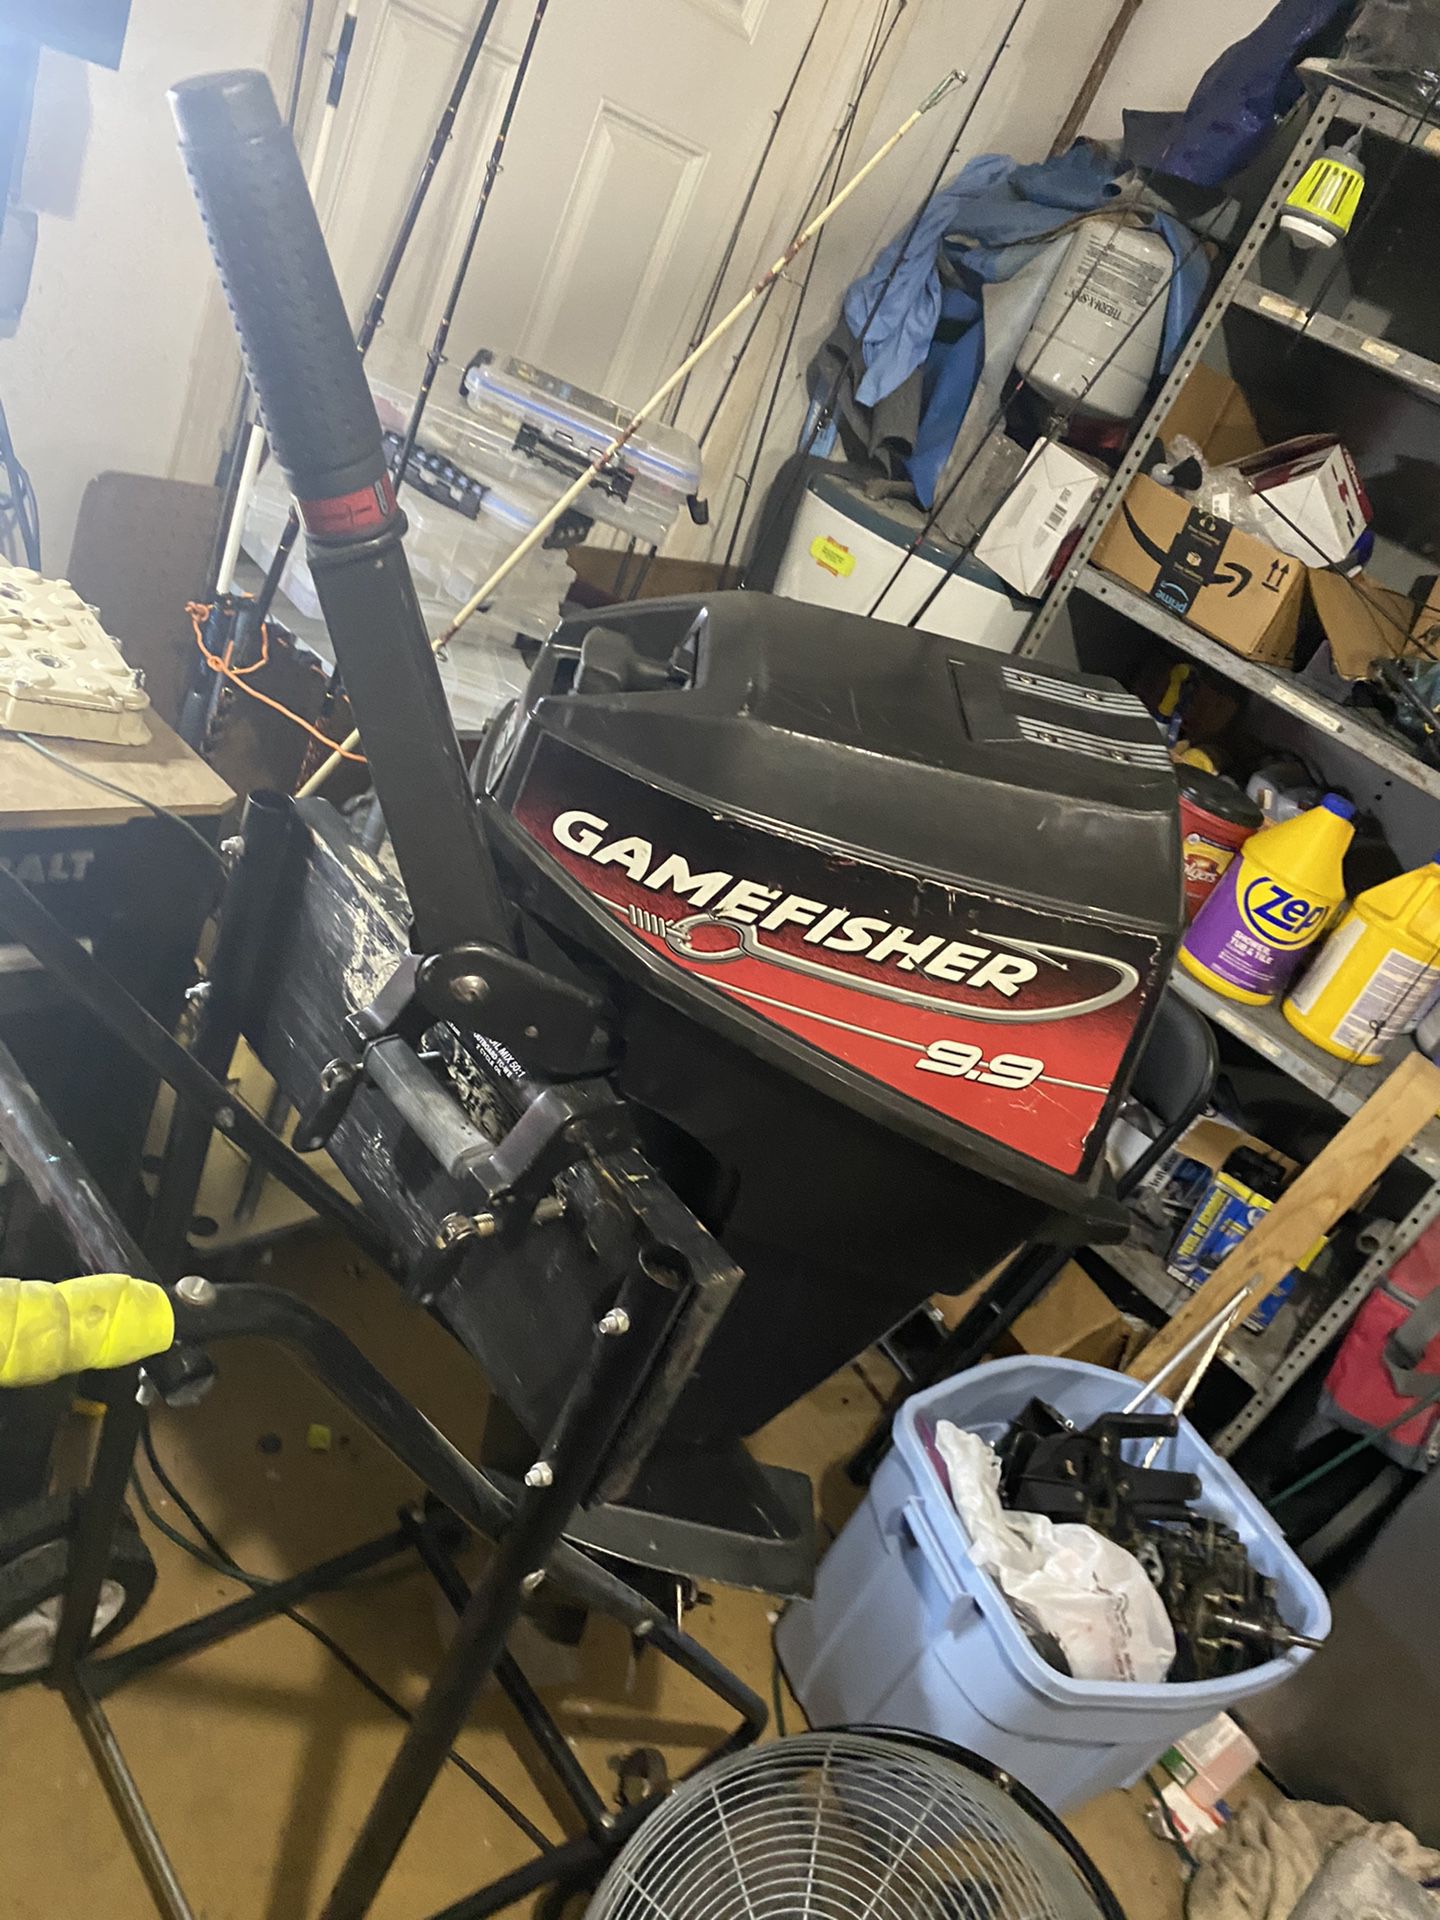 9.9 gamefisher outboard motor